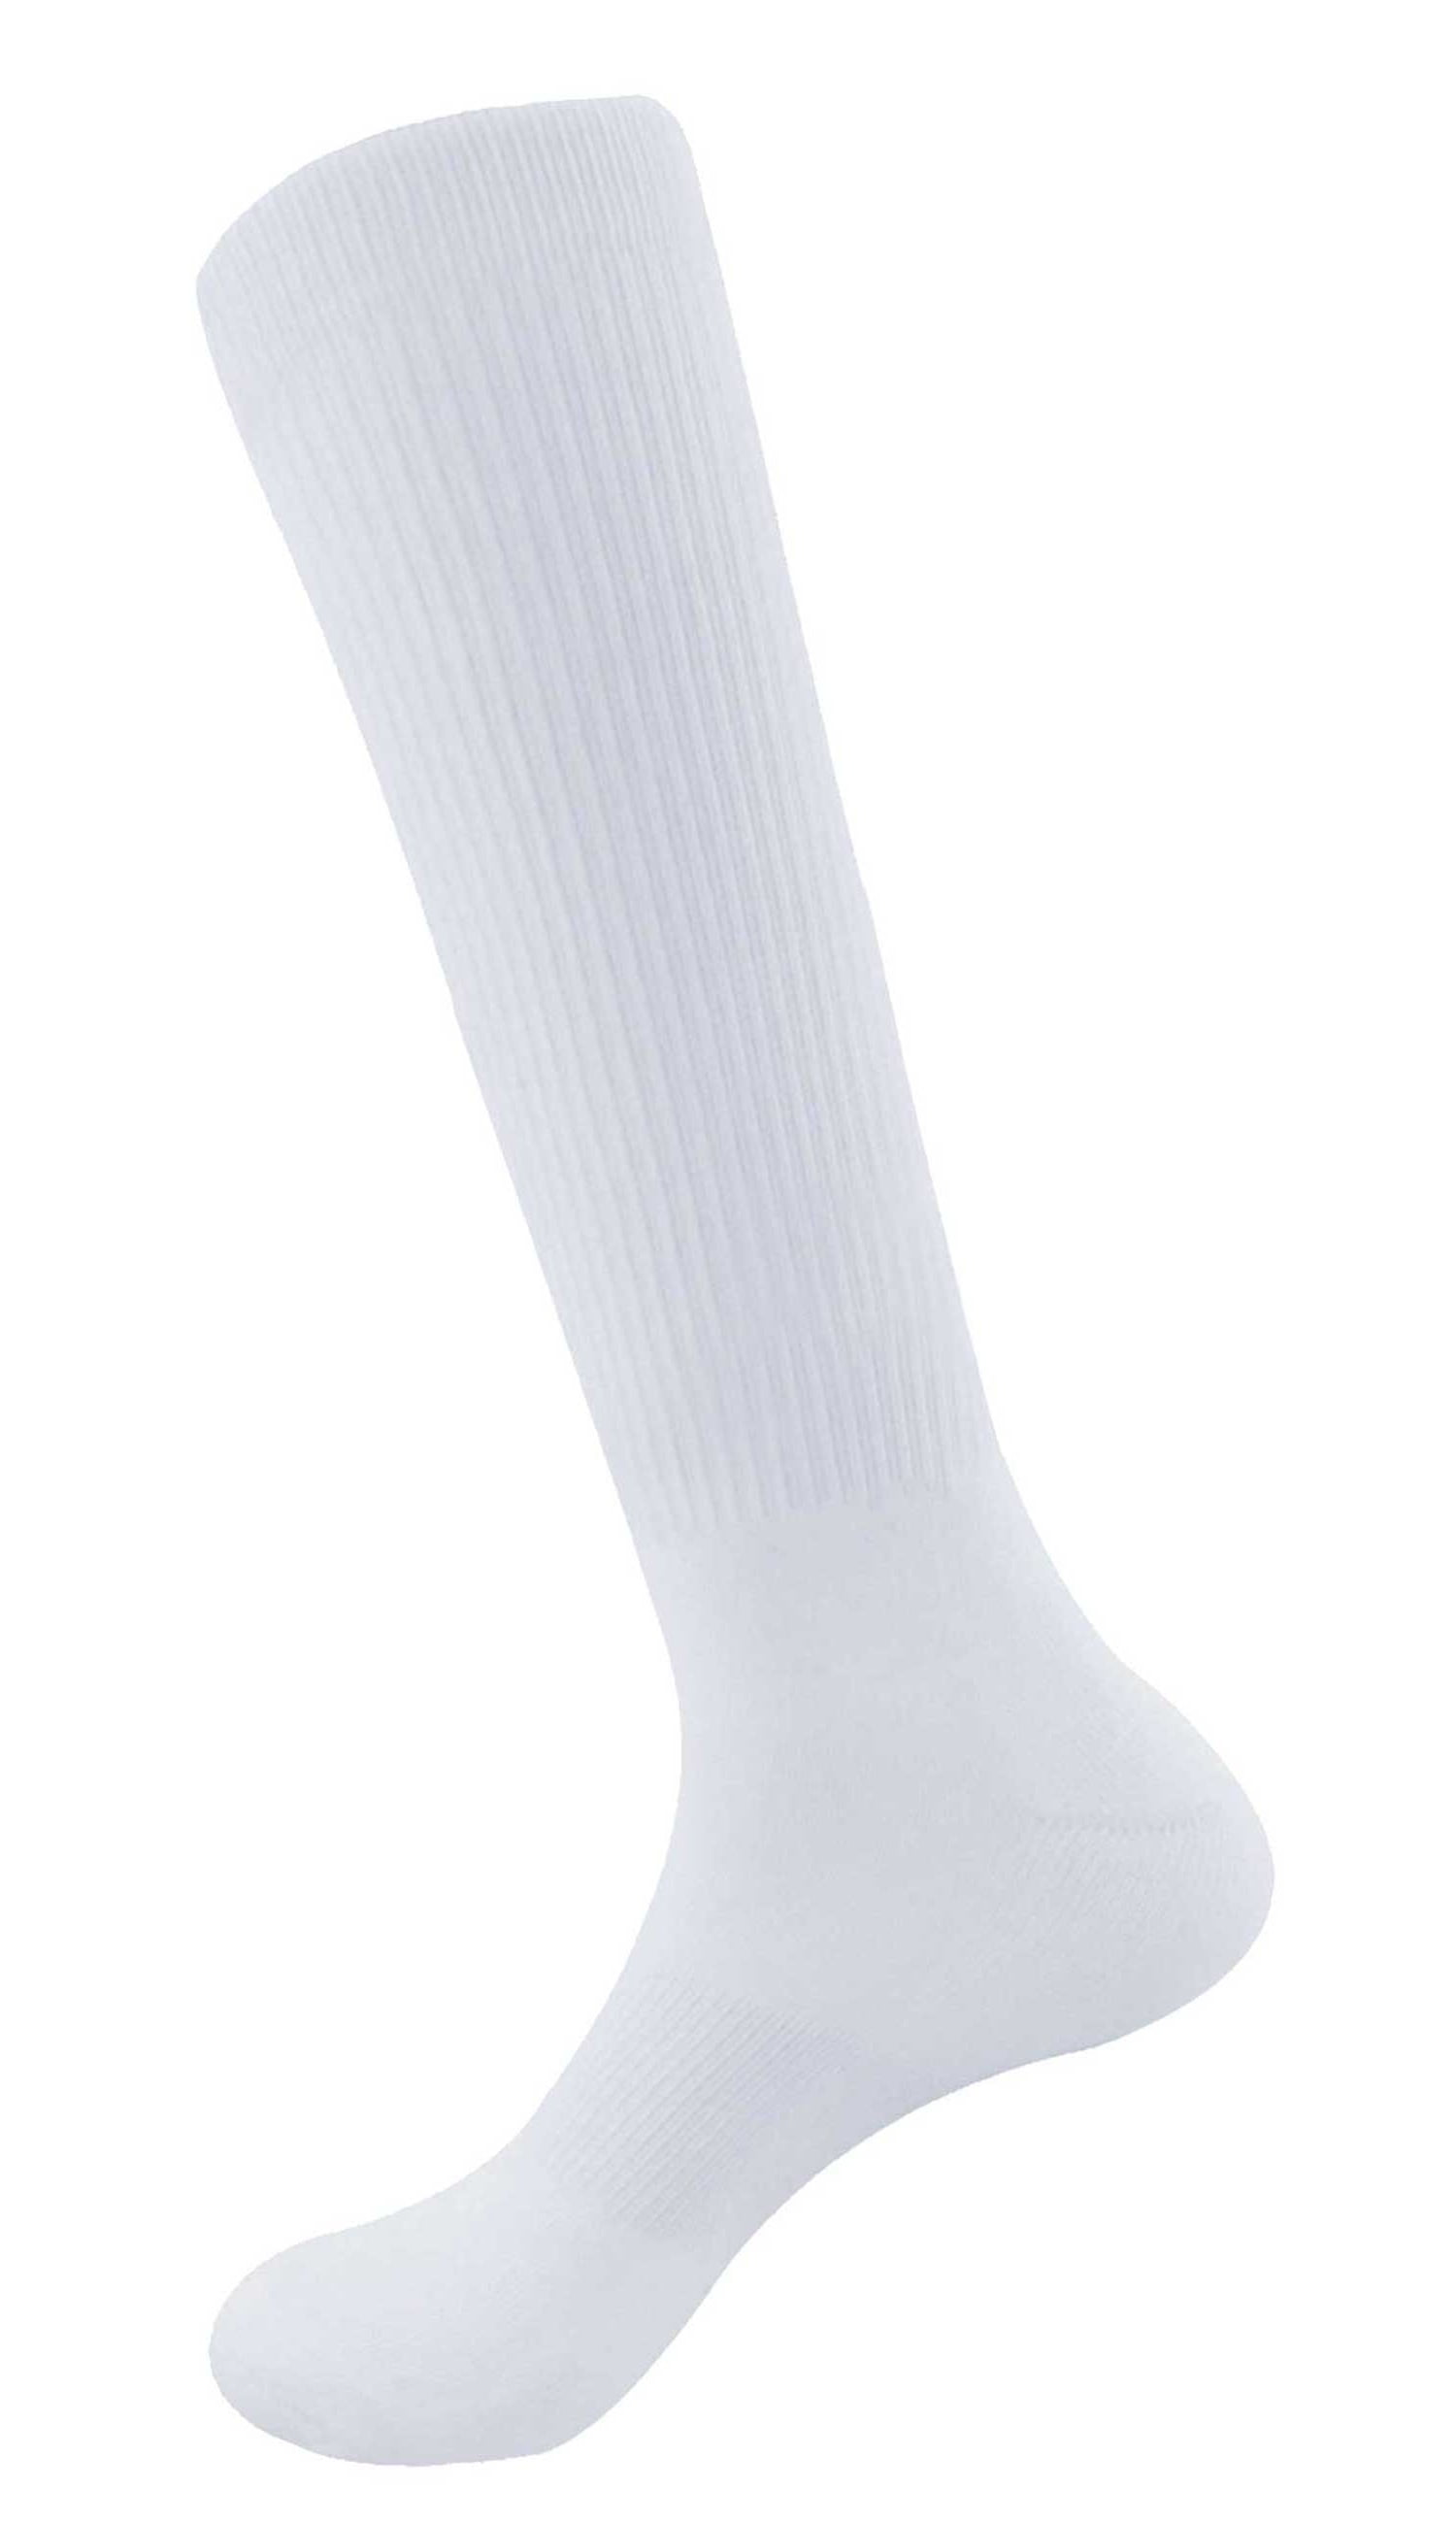 Download BambooMN - Blank Sublimation Socks SubReady Knee High ...